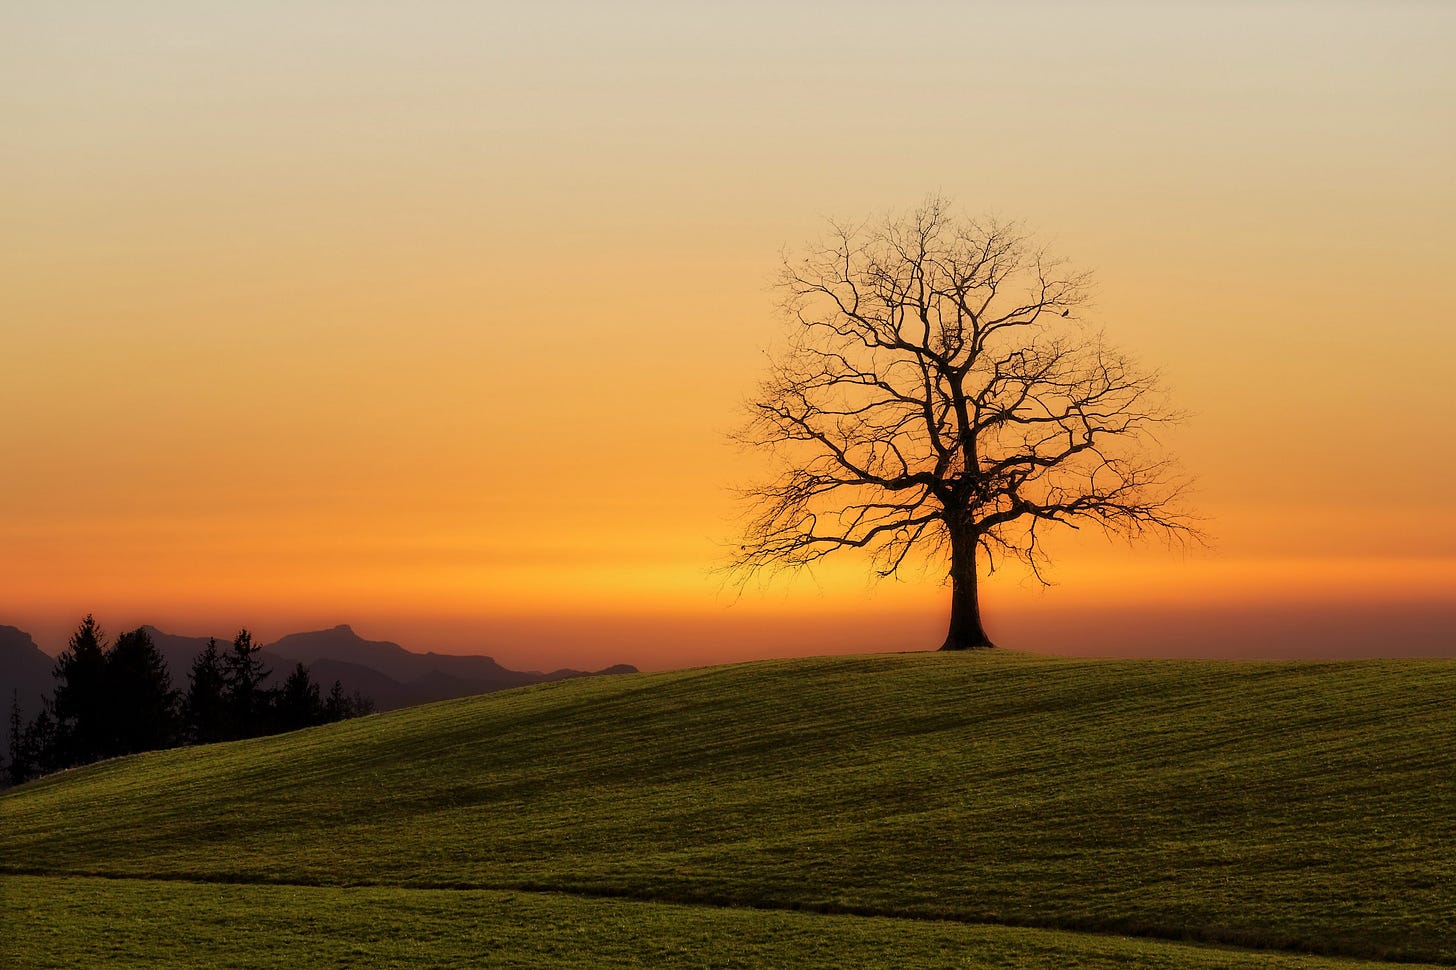 image of a tree on a hill at sunset for poem by Larry G. Maguire